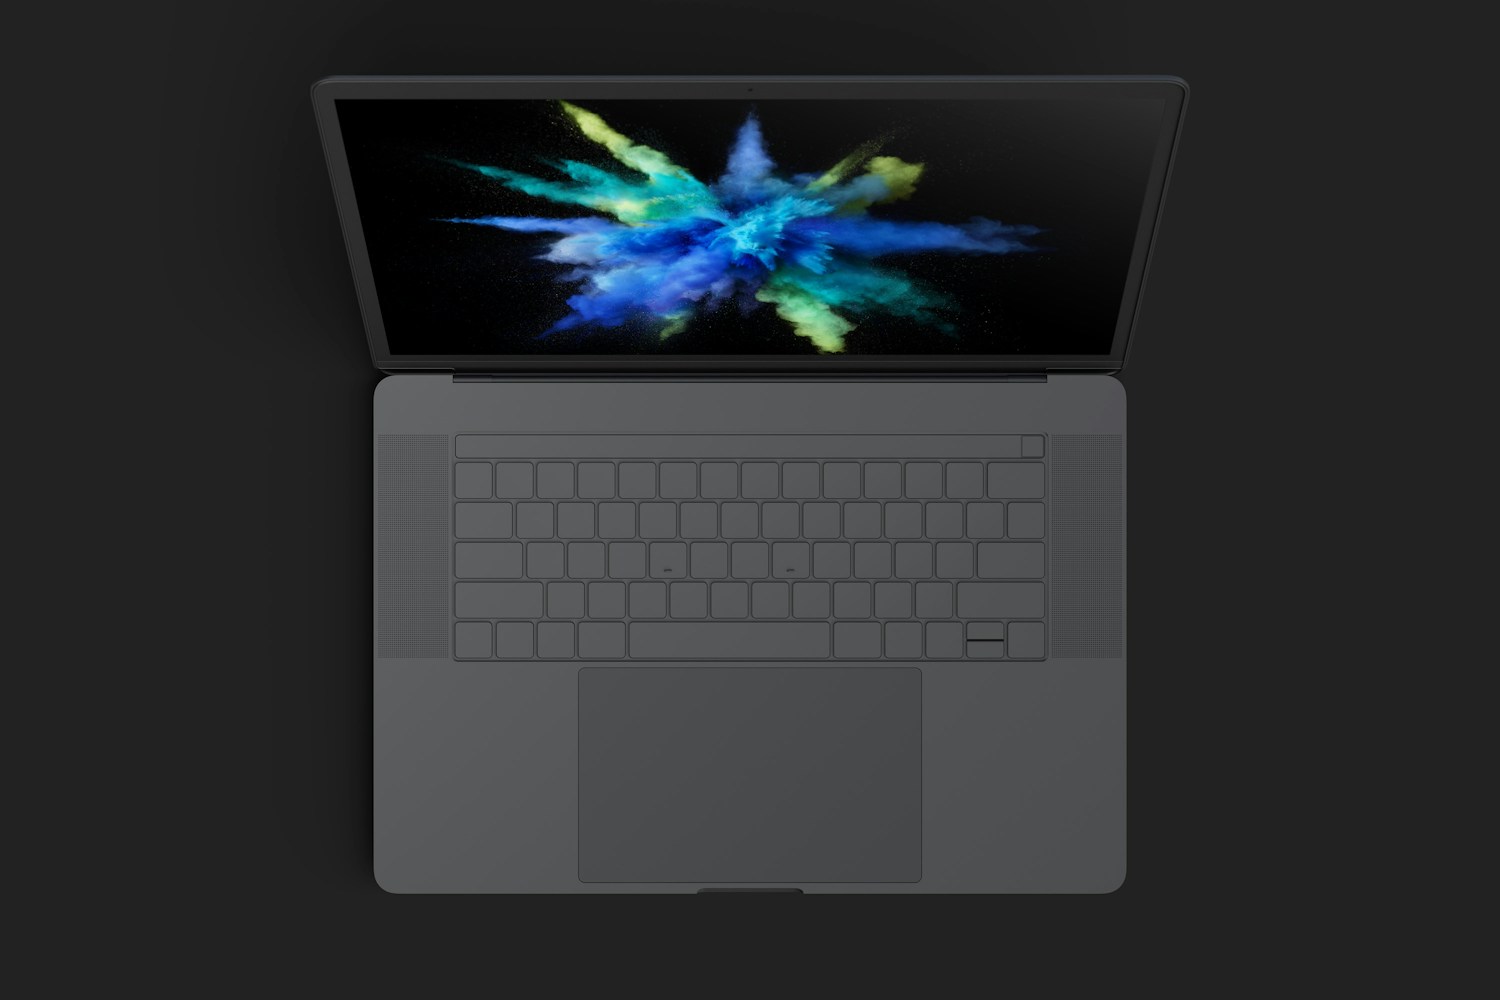 Clay MacBook Pro 15" with Touch Bar, Top View Mockup